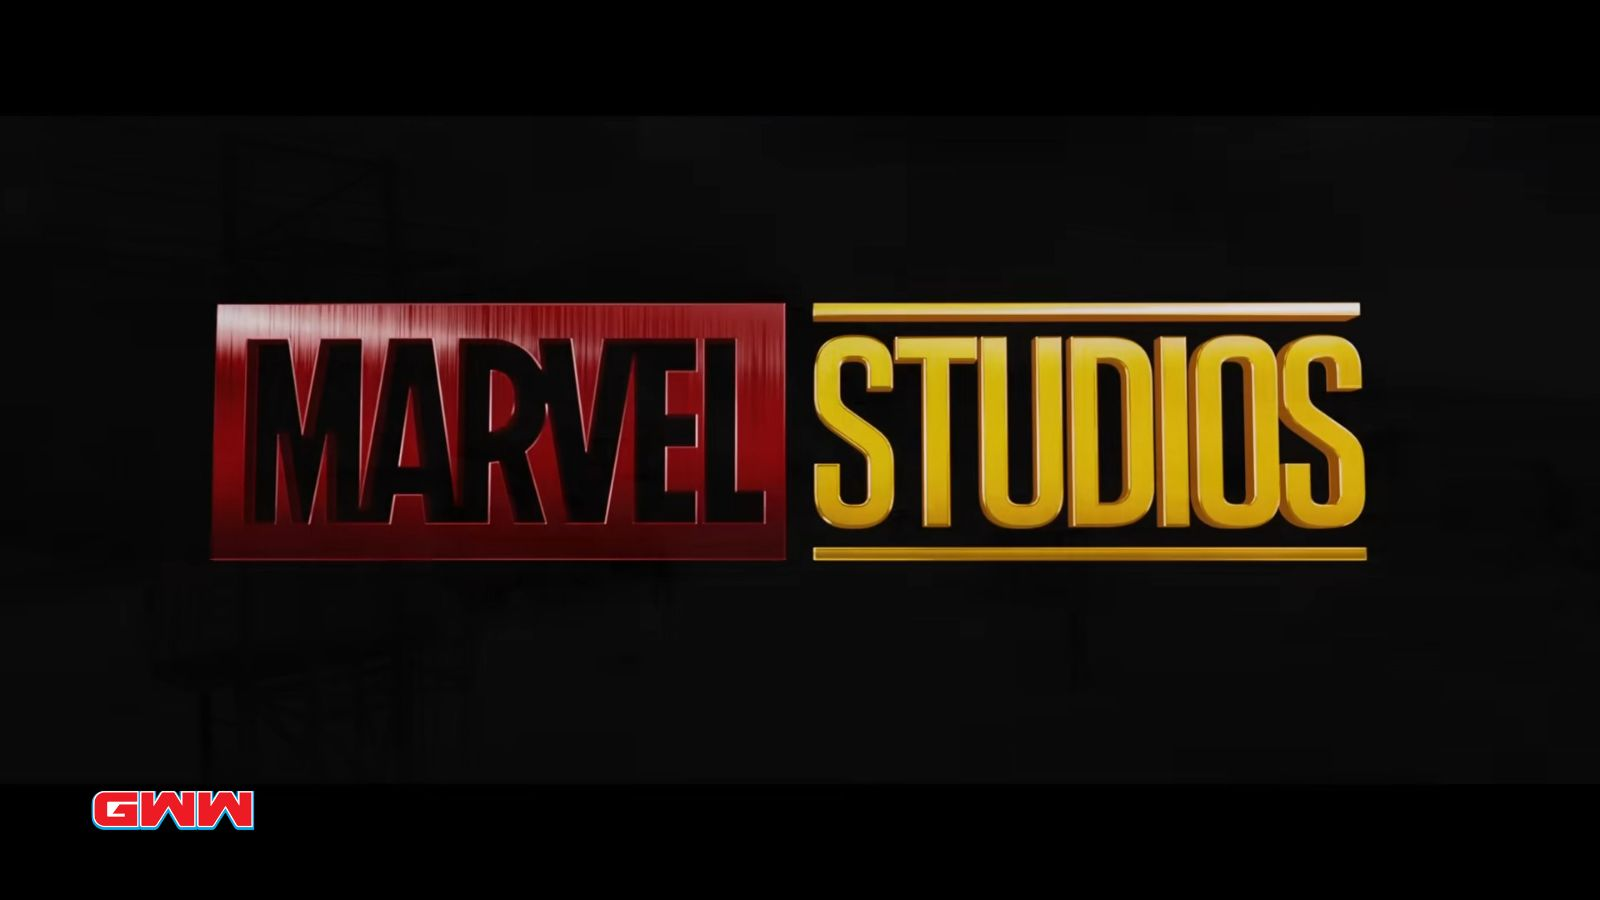 Red and gold "Marvel Studios" logo on a black background.